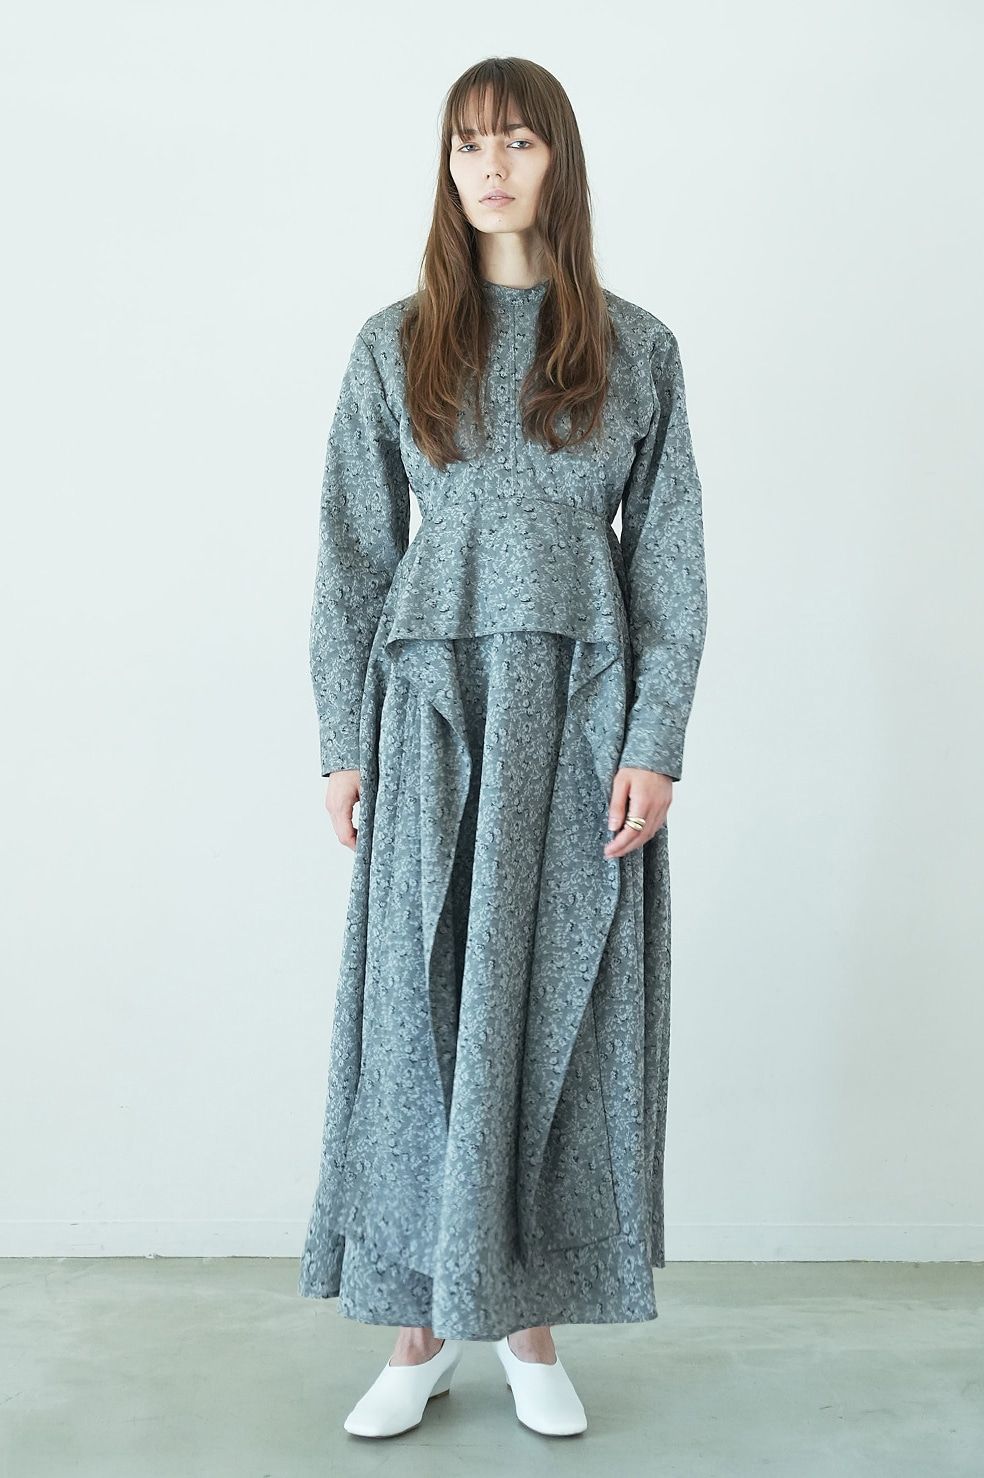 CLANE - ジャガードワンピース - 2WAY JAQUARD ONEPIECE - GREY ...